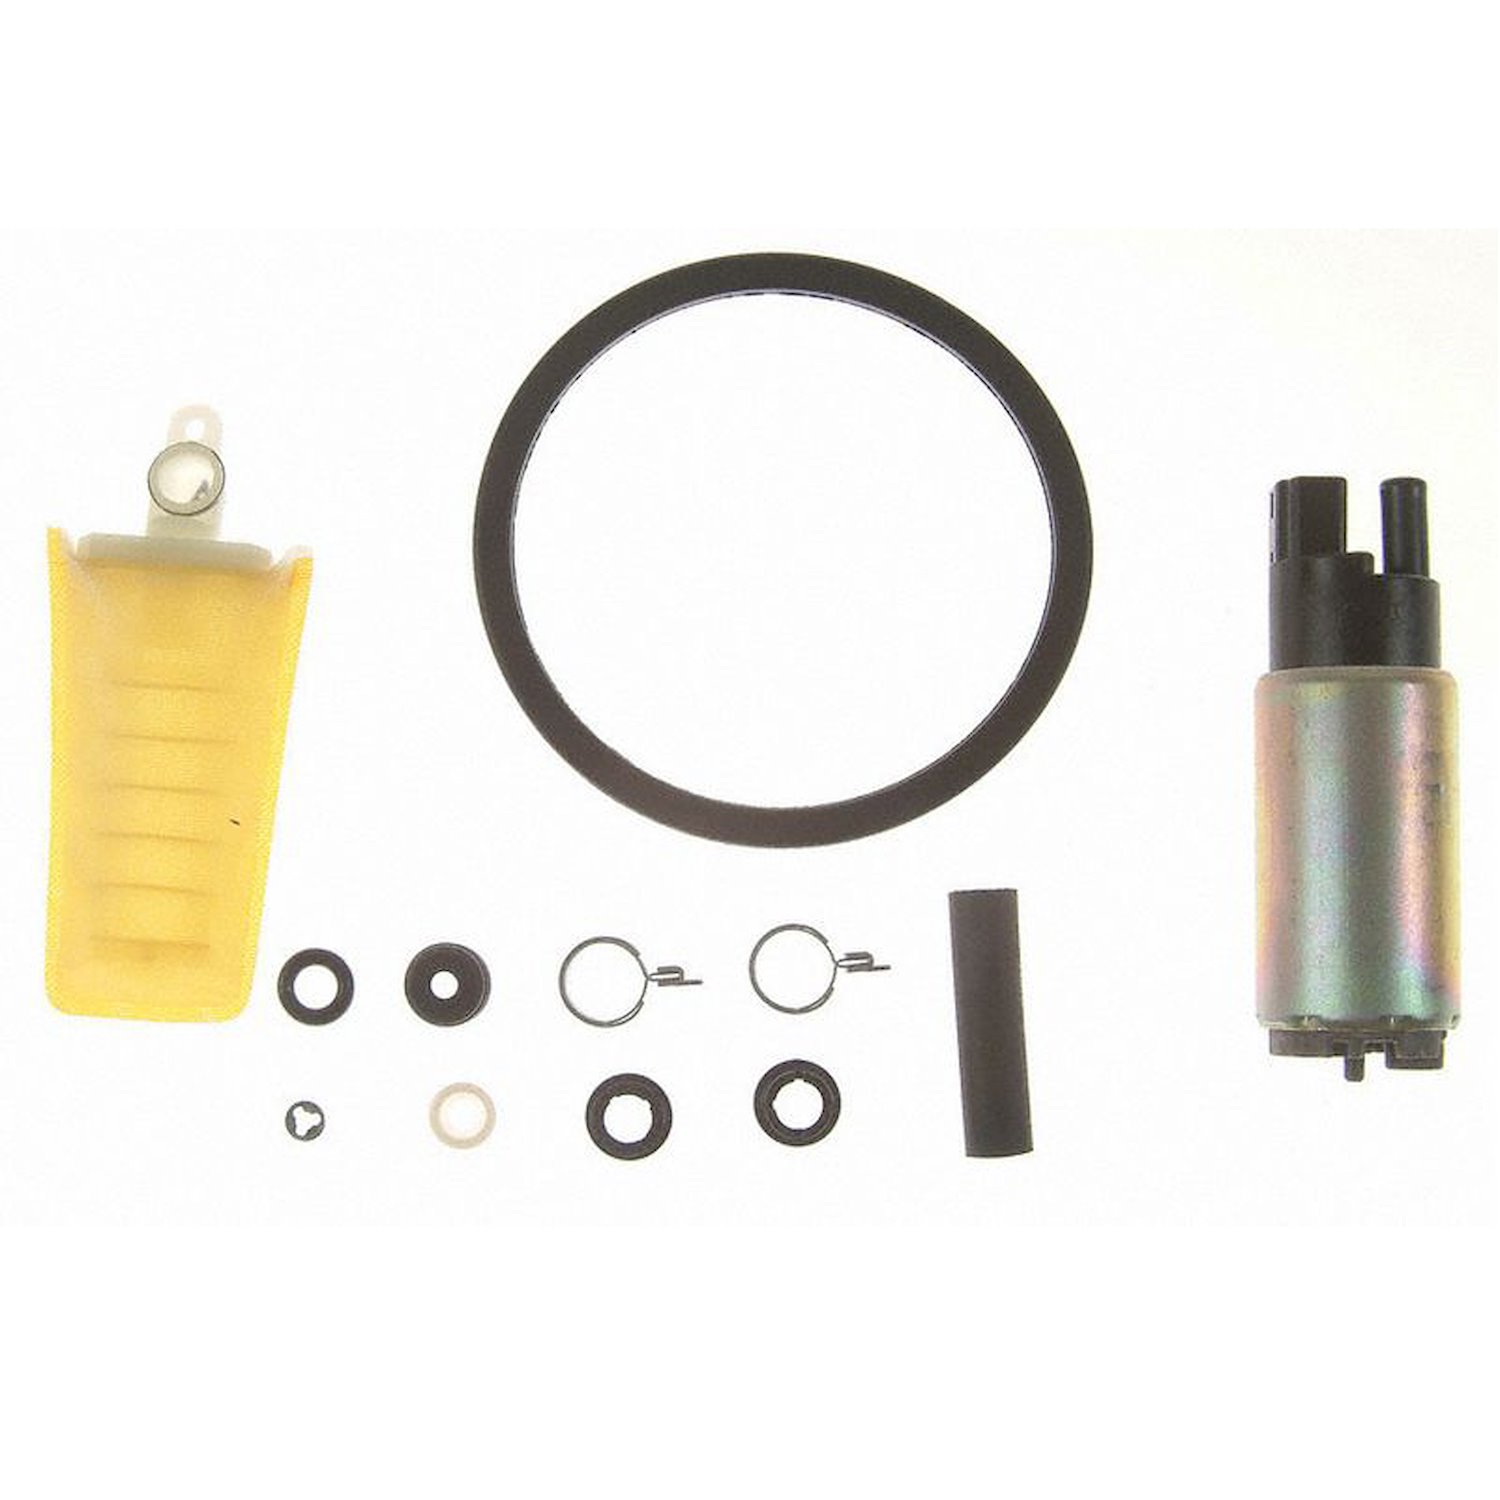 EFI In-Tank Electric Fuel Pump And Strainer Set for 2000 Toyota Avalon